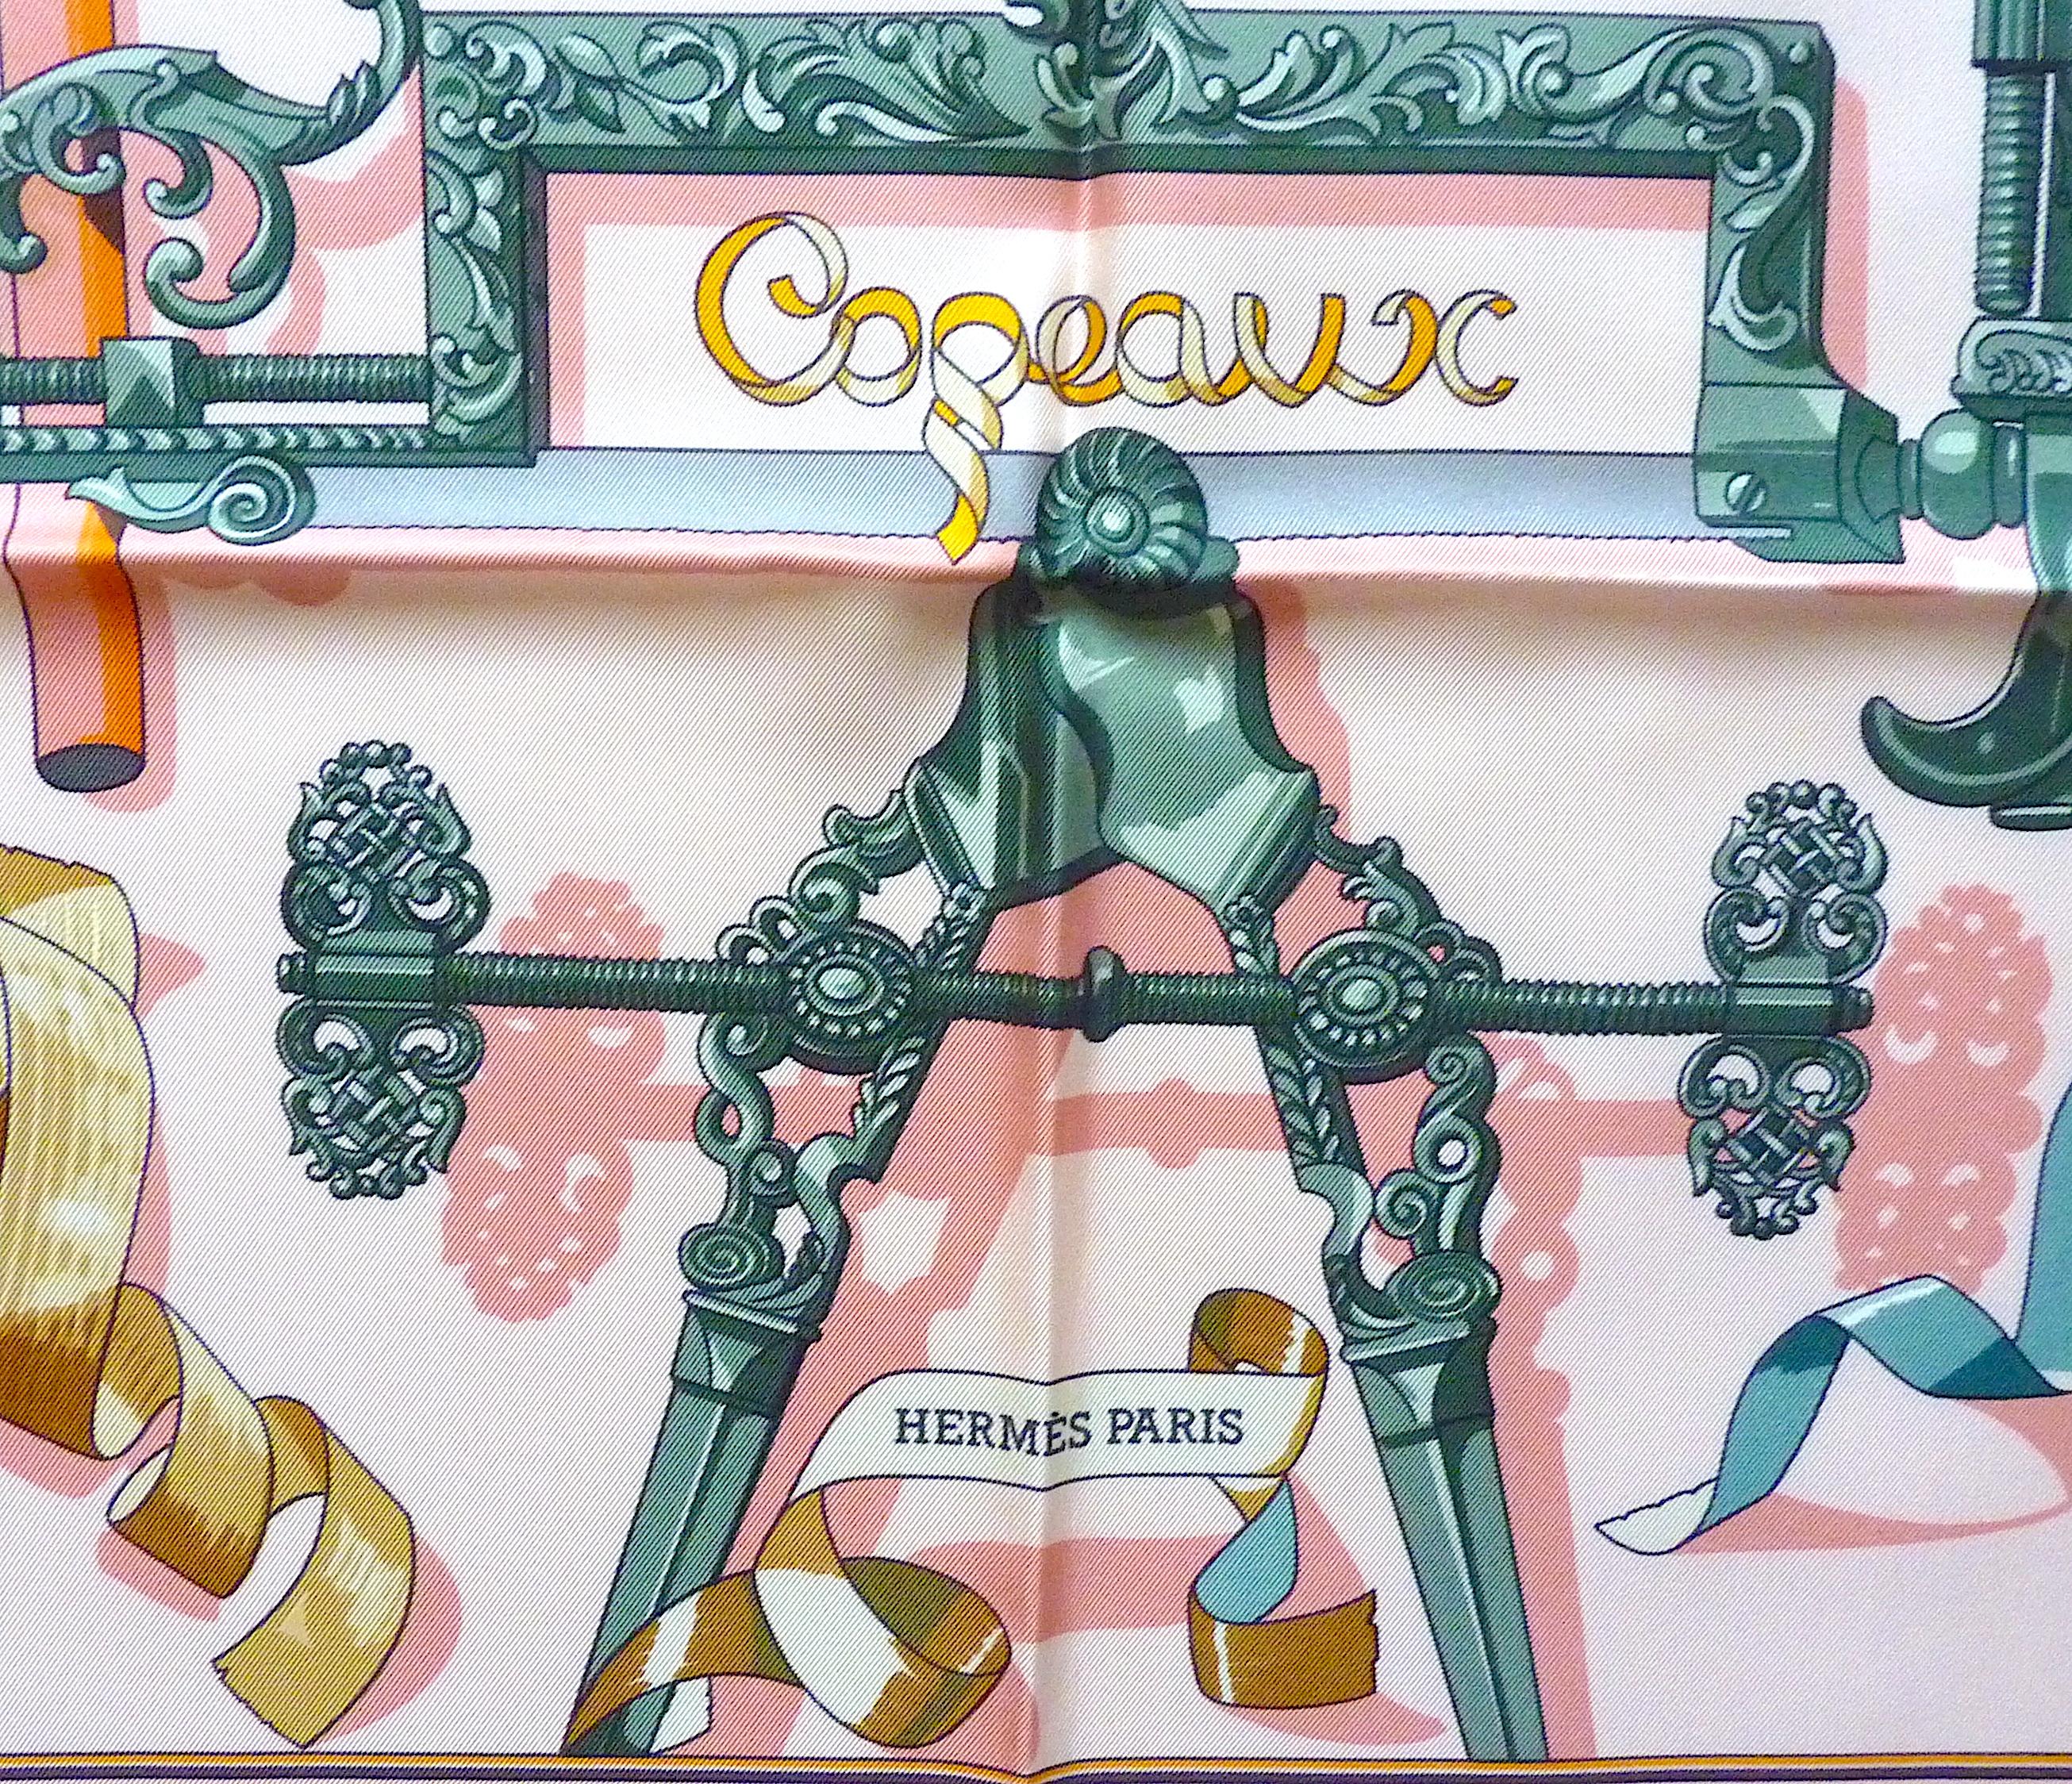 HERMES Scarf Copeaux by Caty Latham,  Never Worn, only one single edition in 1998

Exquisite Pale Pink Background, Soft Gray Blue and Gold Pattern

CONDITION : Pristine Condition ! Never worn !

Care Tag attached, 100% Silk Twill, no box

Size :